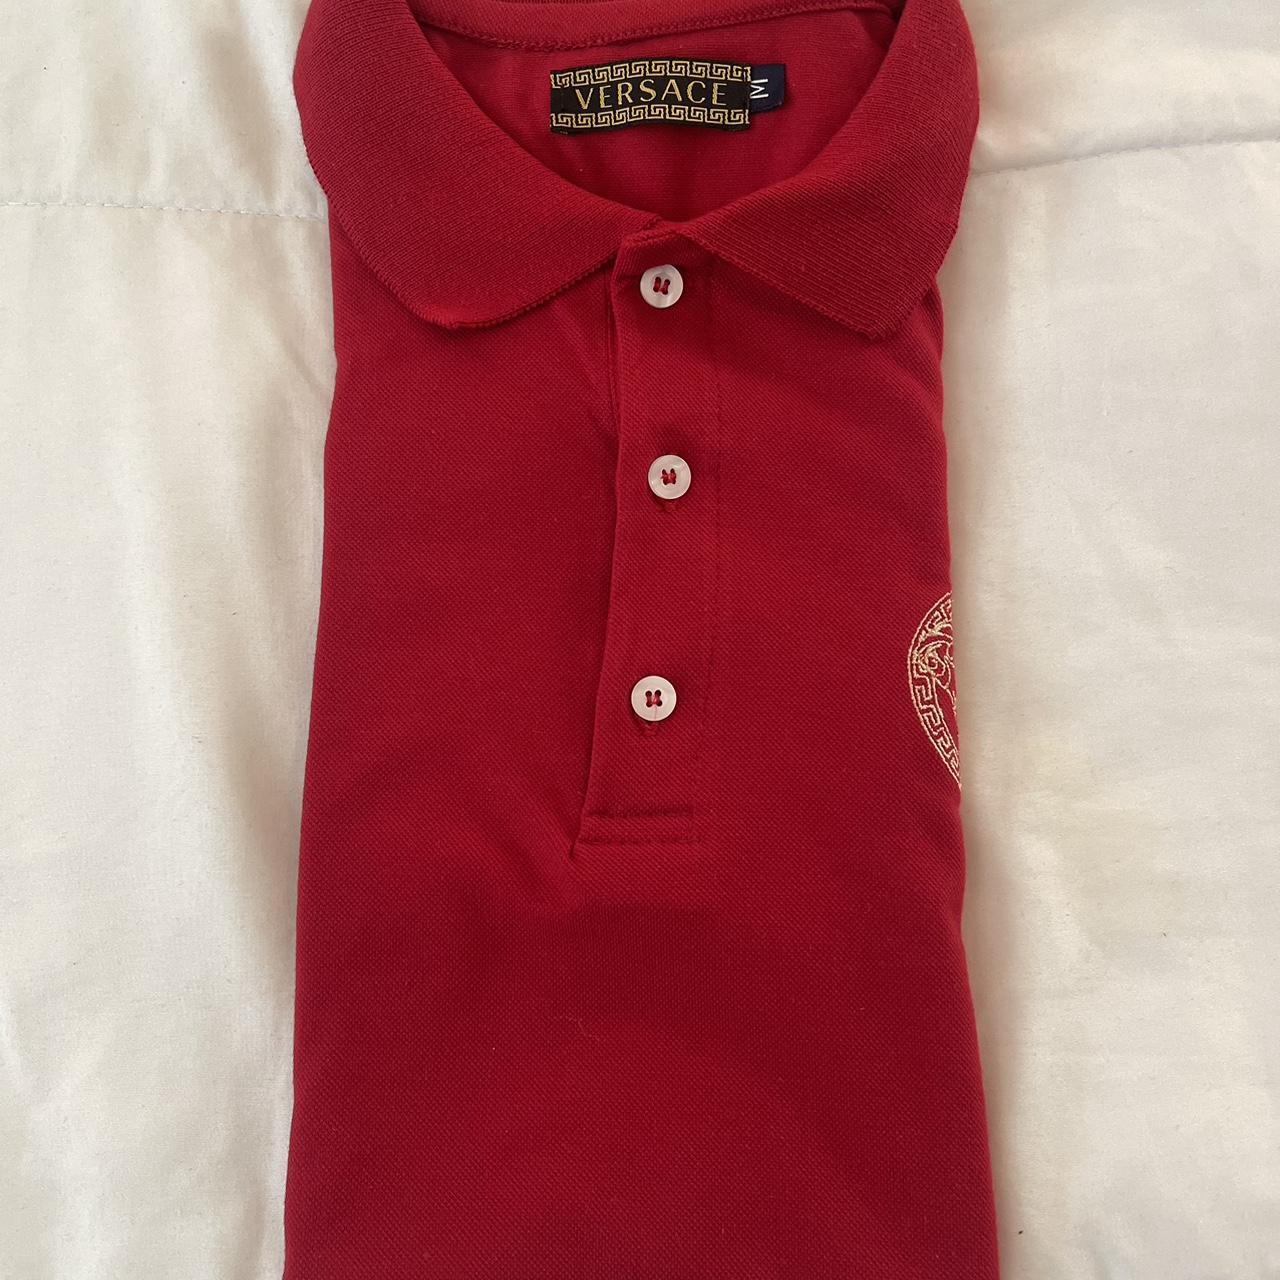 Men’s Red Rep/Fake Versace Polo, size Medium, fits... - Depop